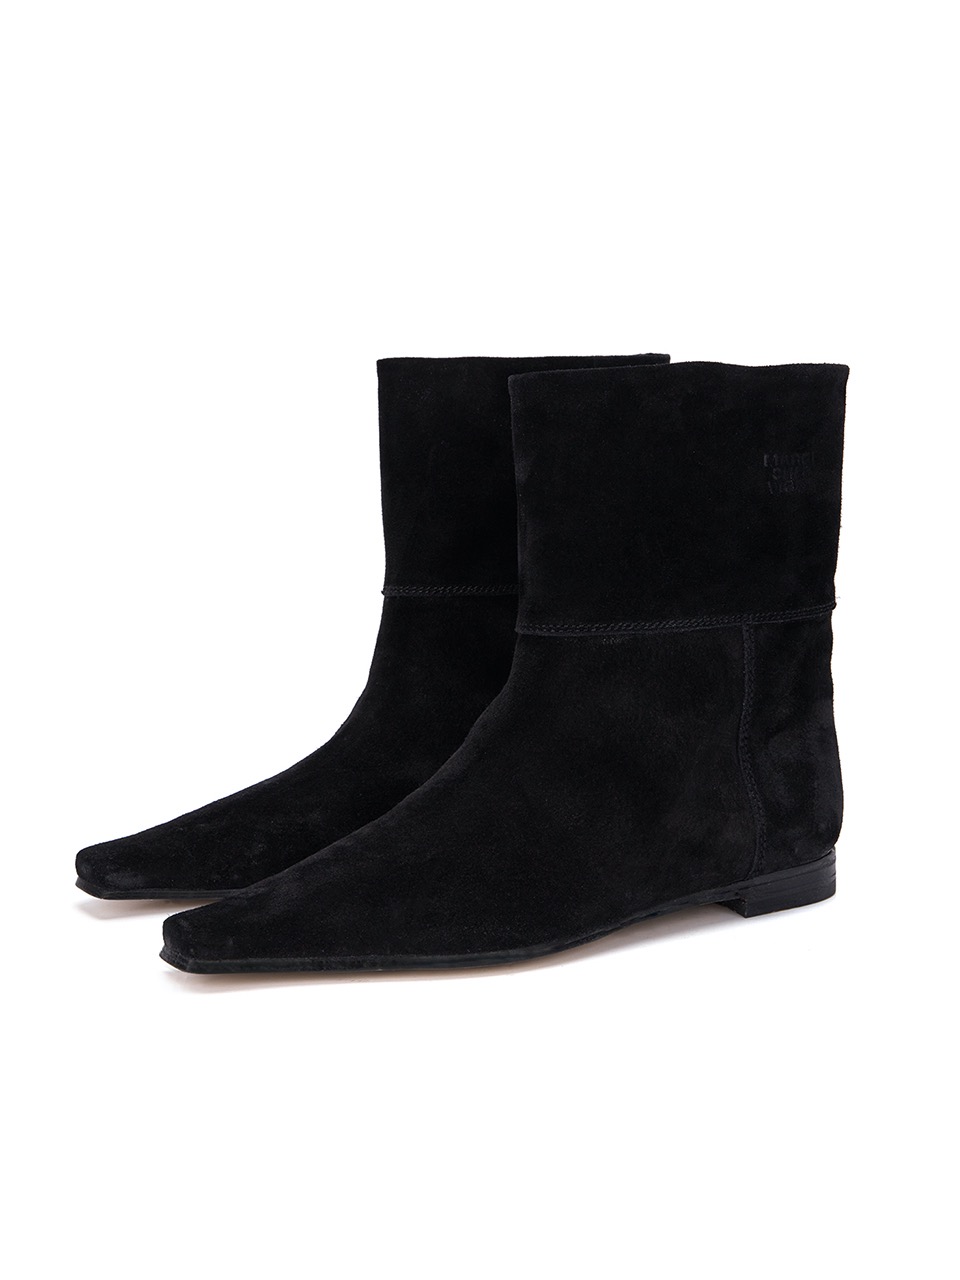 POINTED TOE ANKLE BOOTS_black suede